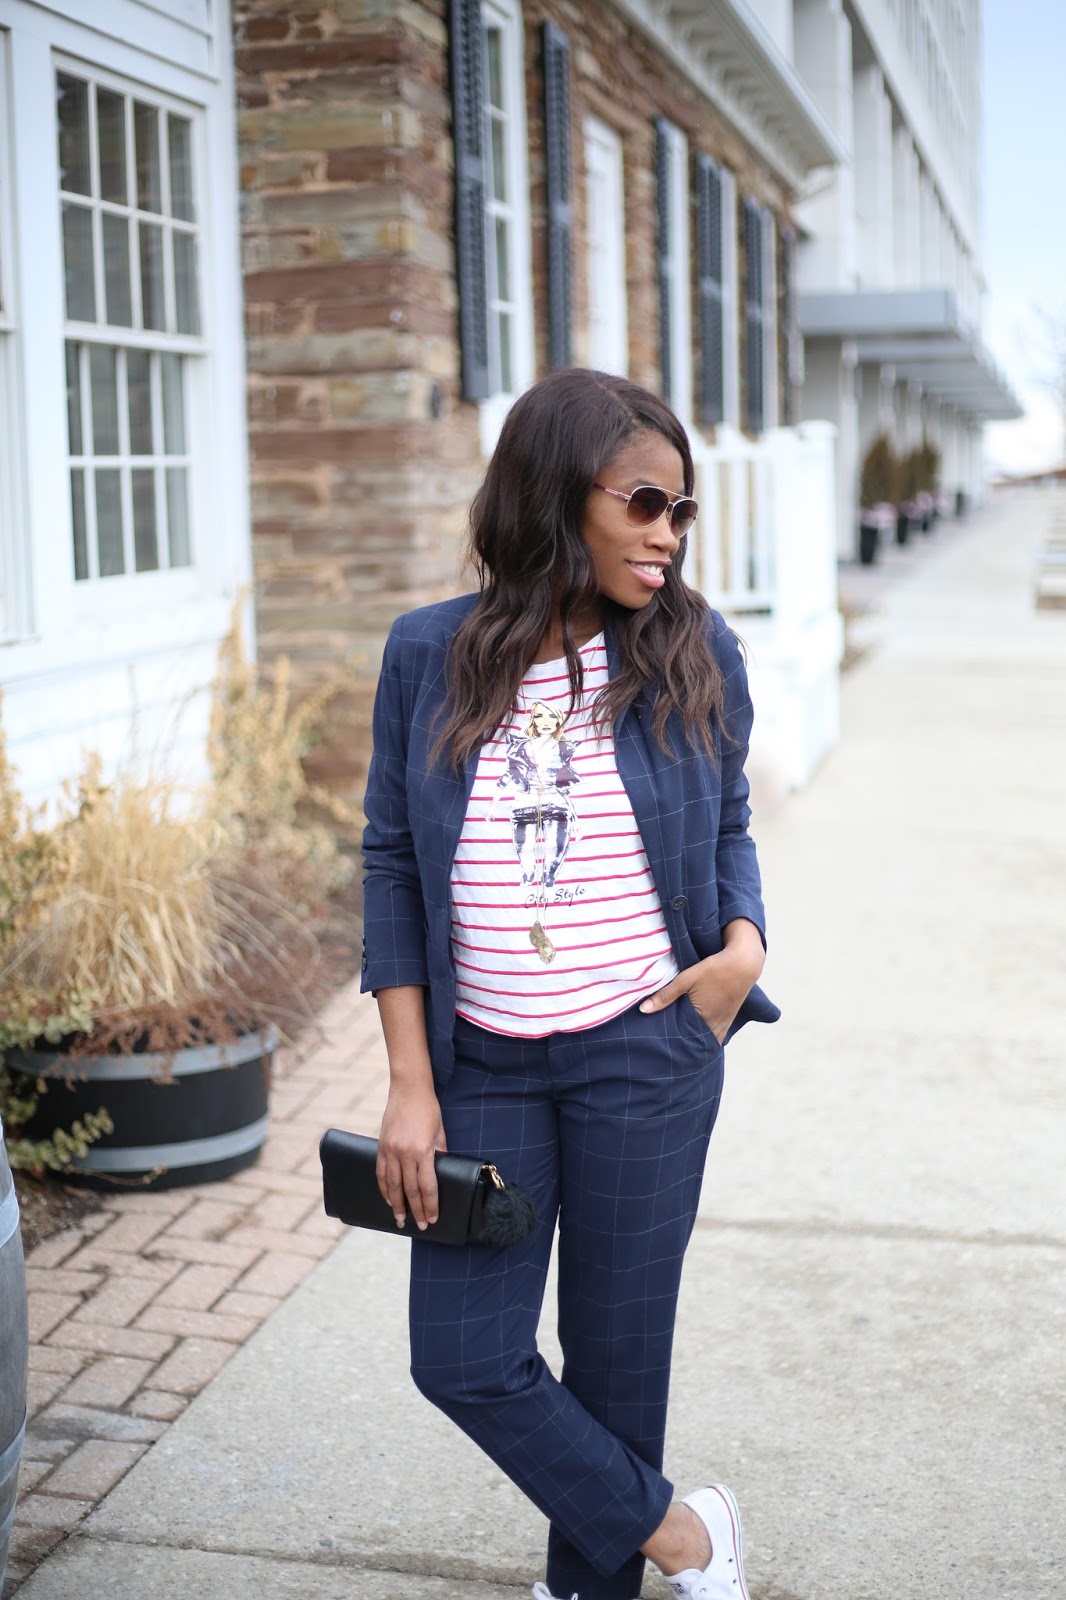 A Patterned suit with converse sneakers, Toronto Blogger